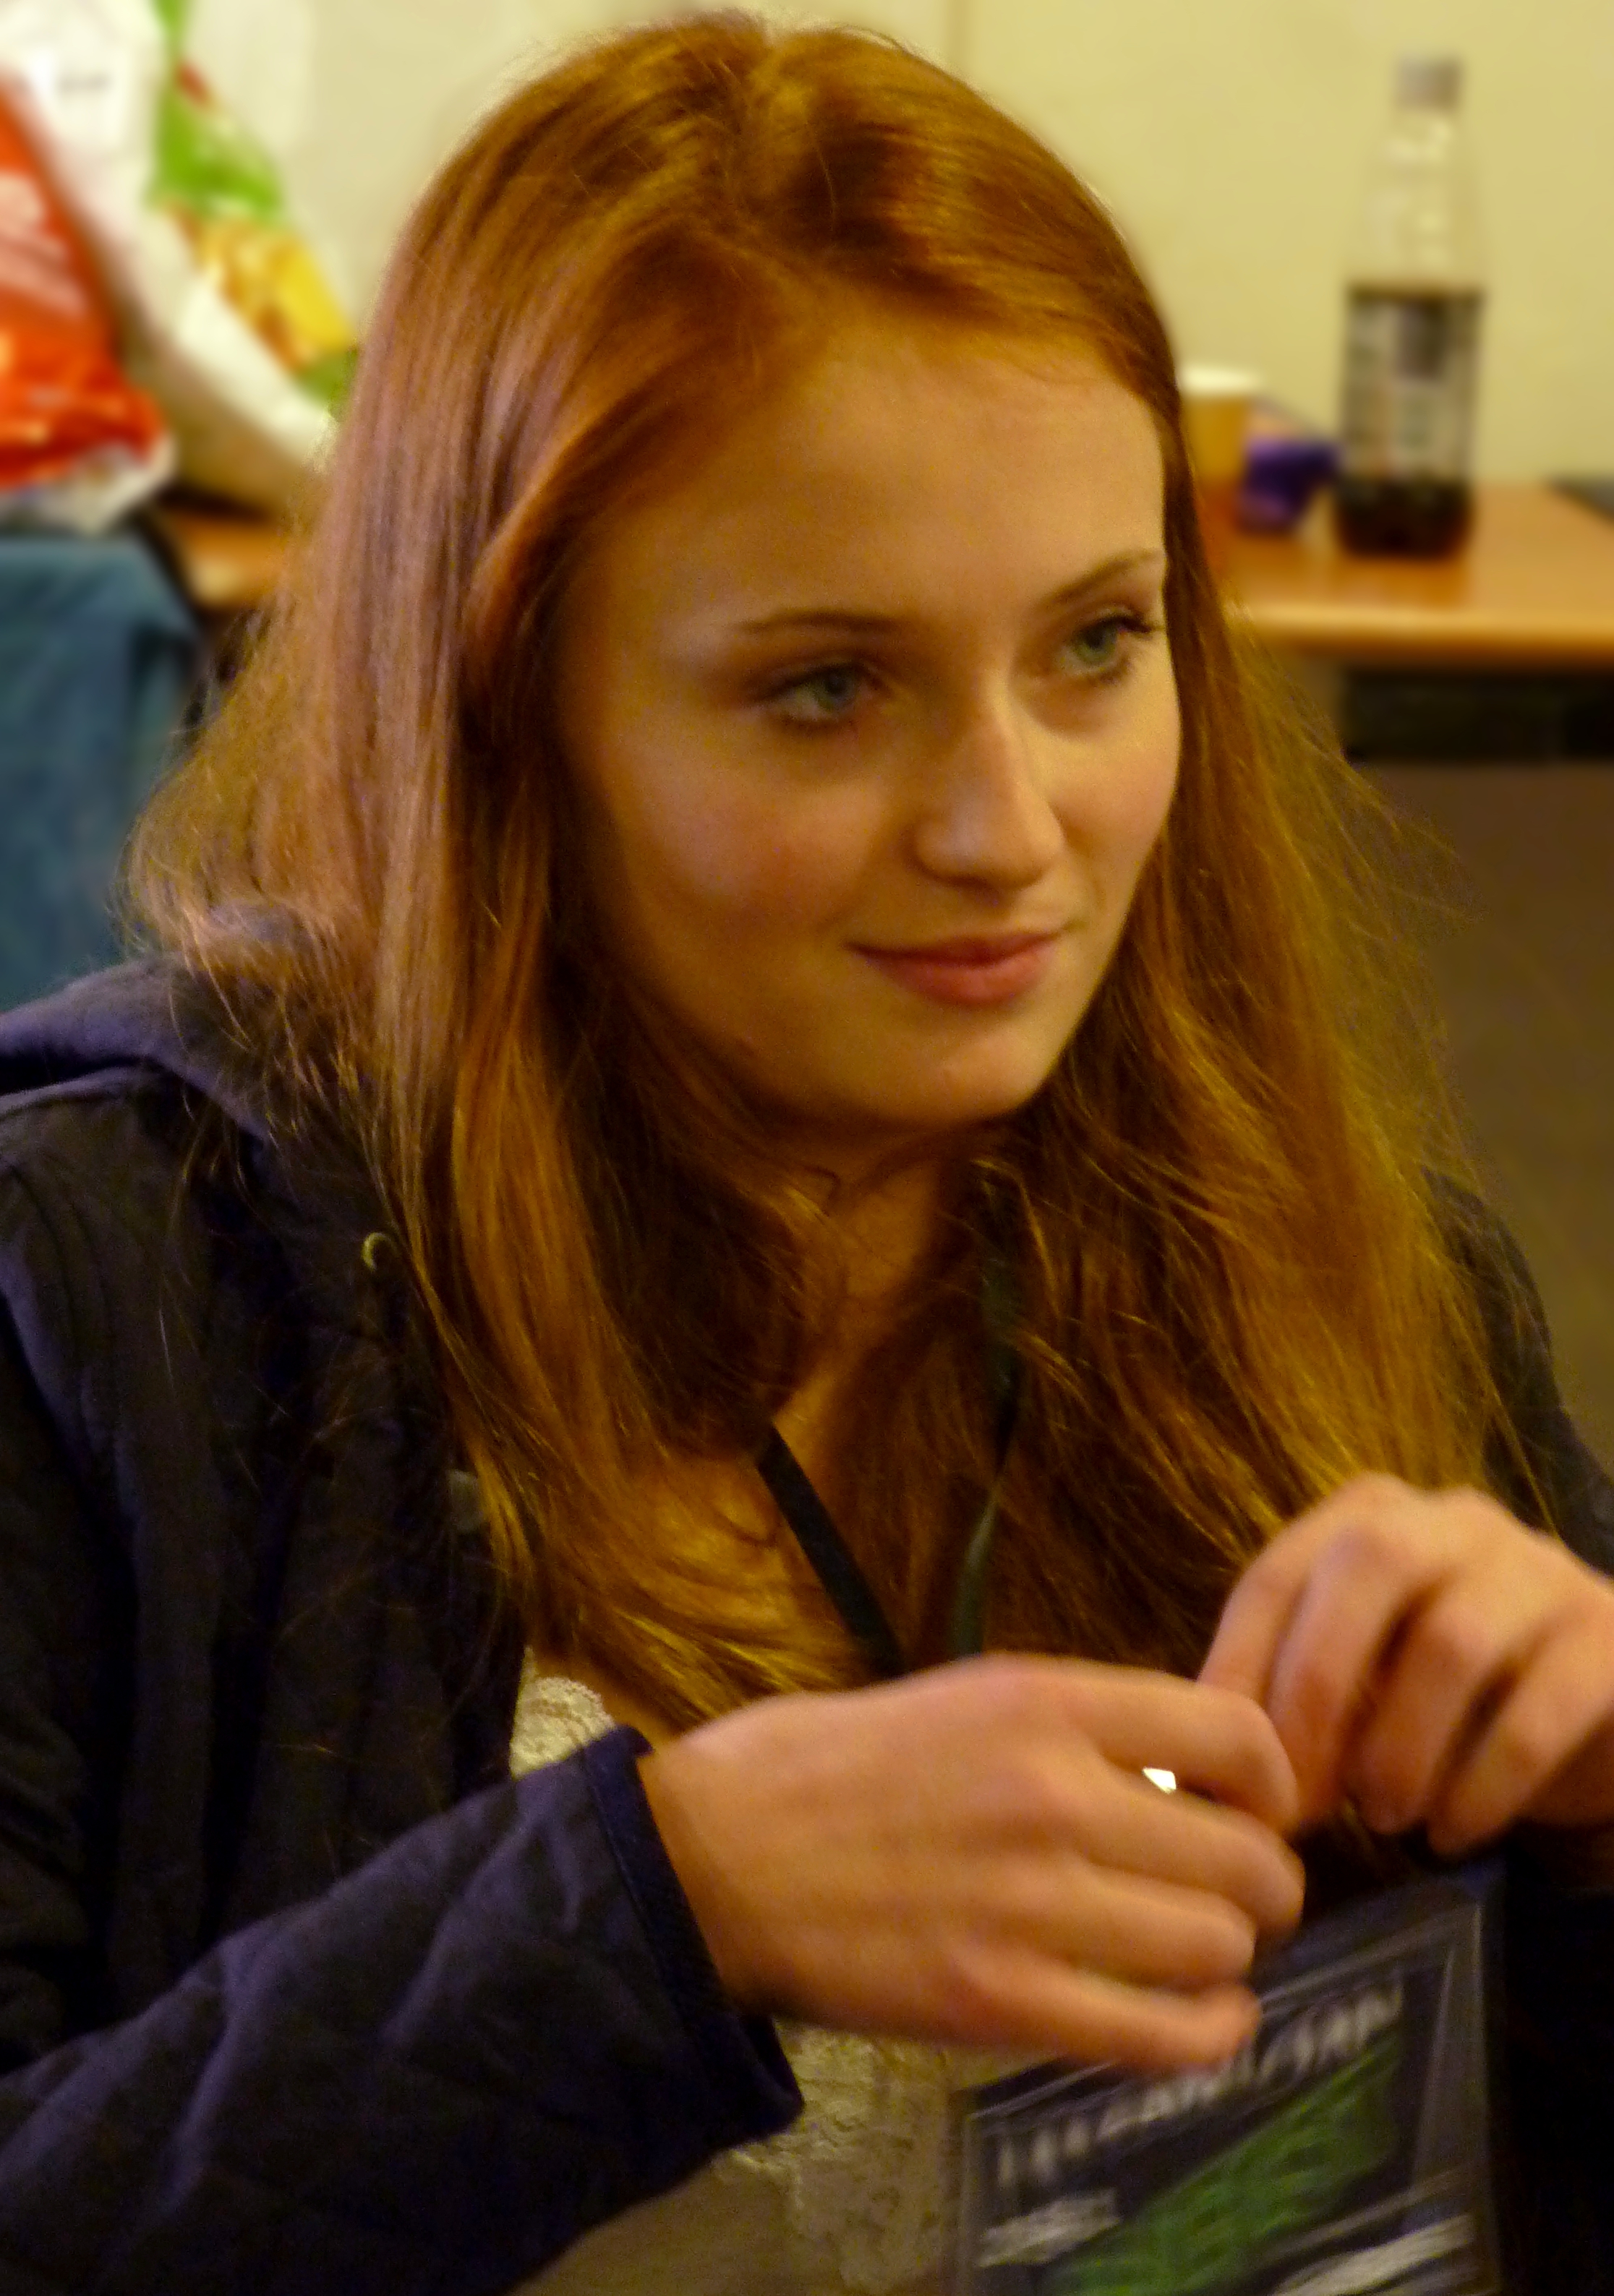 Filesophie Turner Actress 2011 Cropped Wikipedia